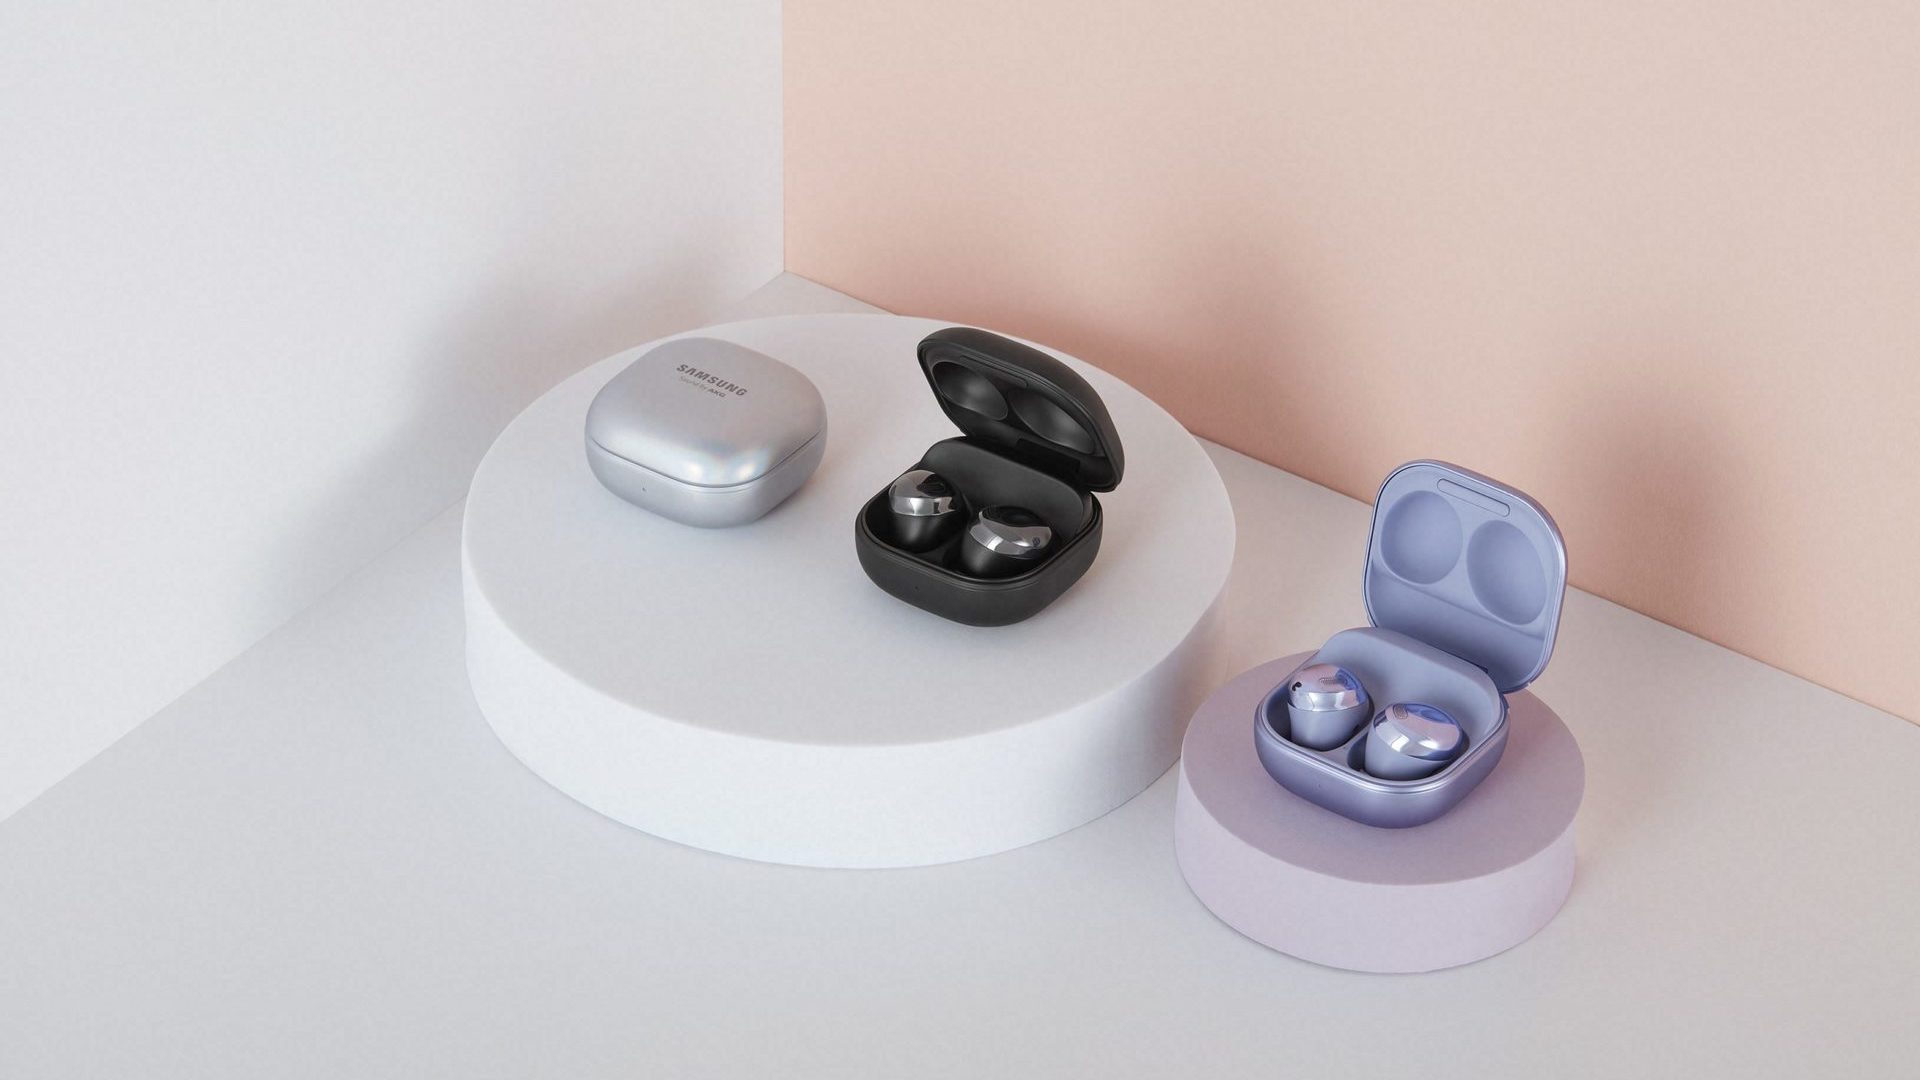 The Samsung Galaxy Buds Pro in silver, black, and purple.